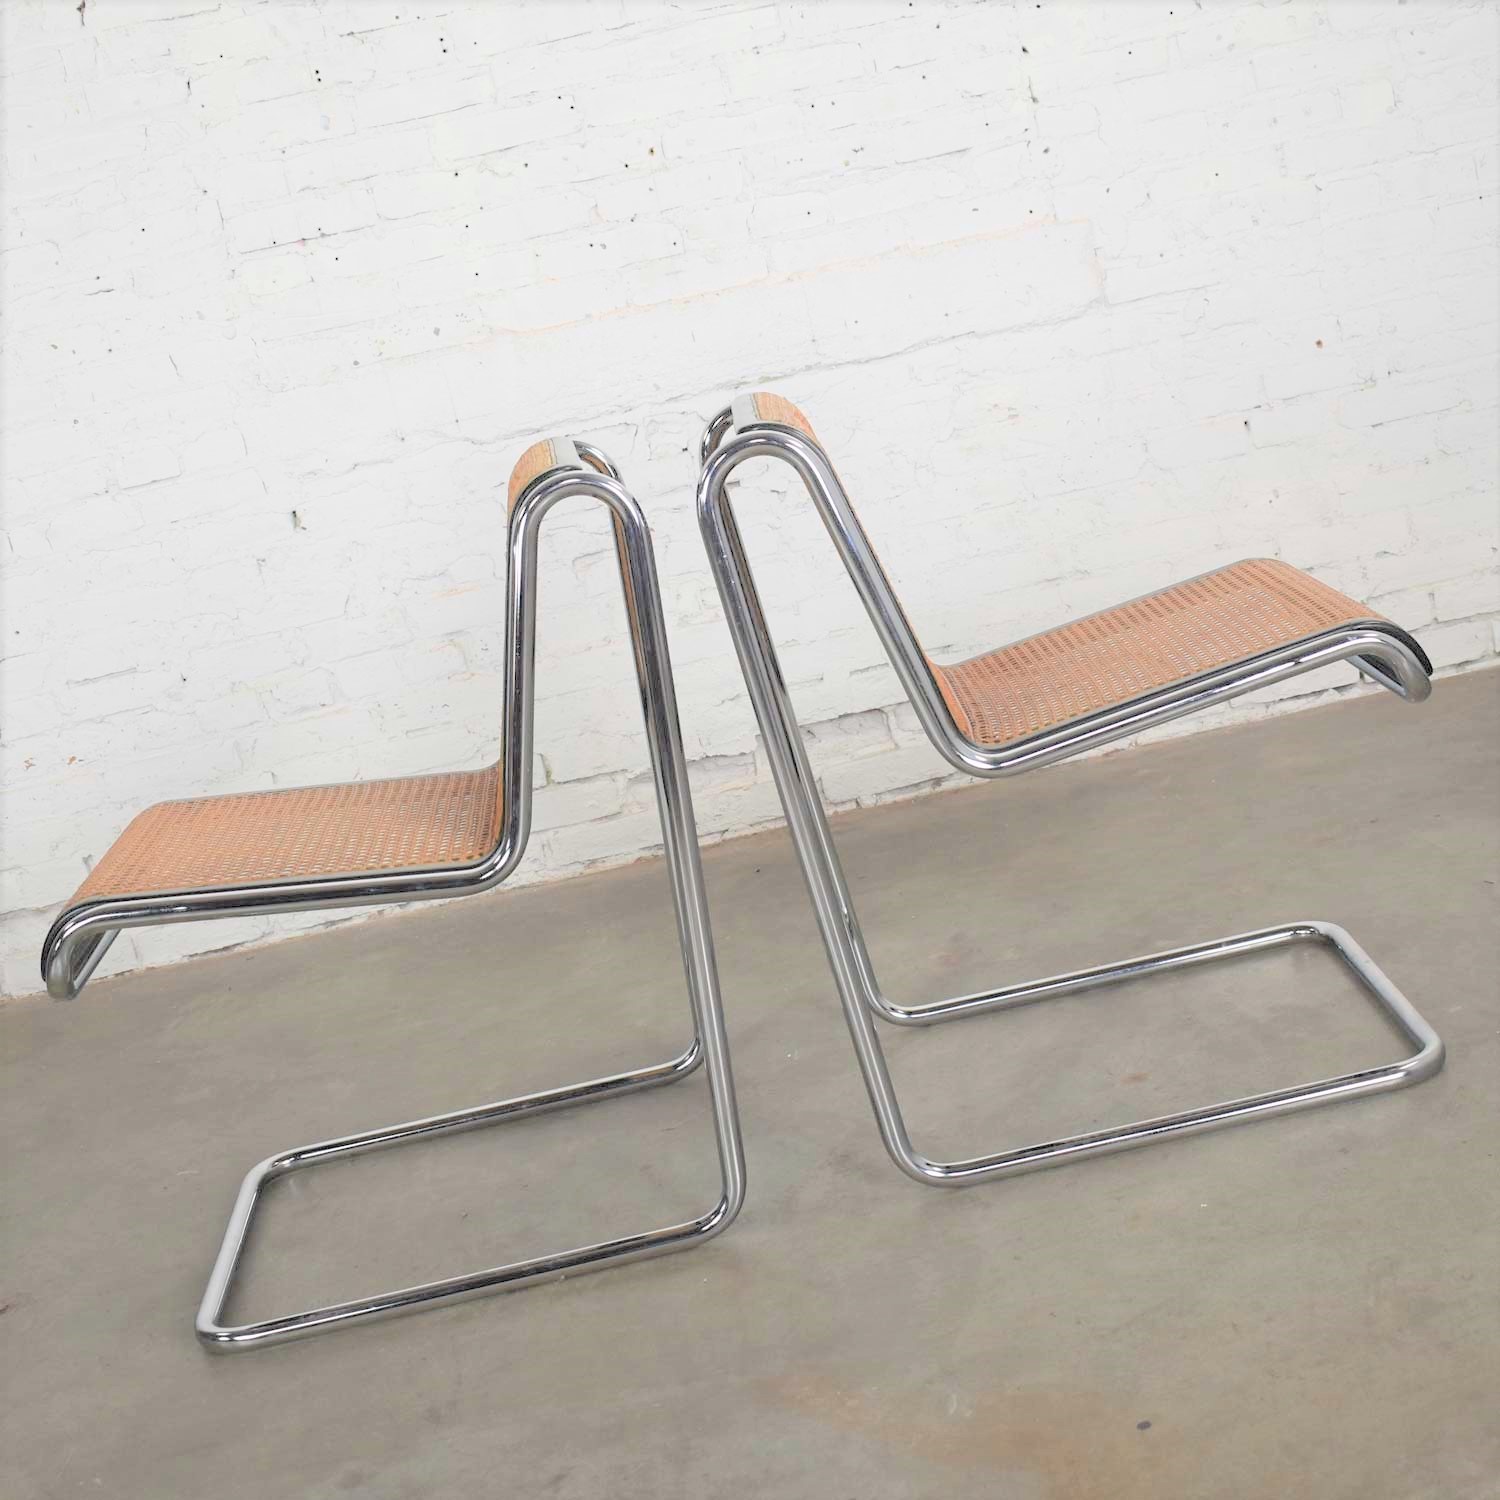 Pair Breuer Bauhaus Style Reverse Cantilever Chairs in Chrome Tube Black Wood & Cane